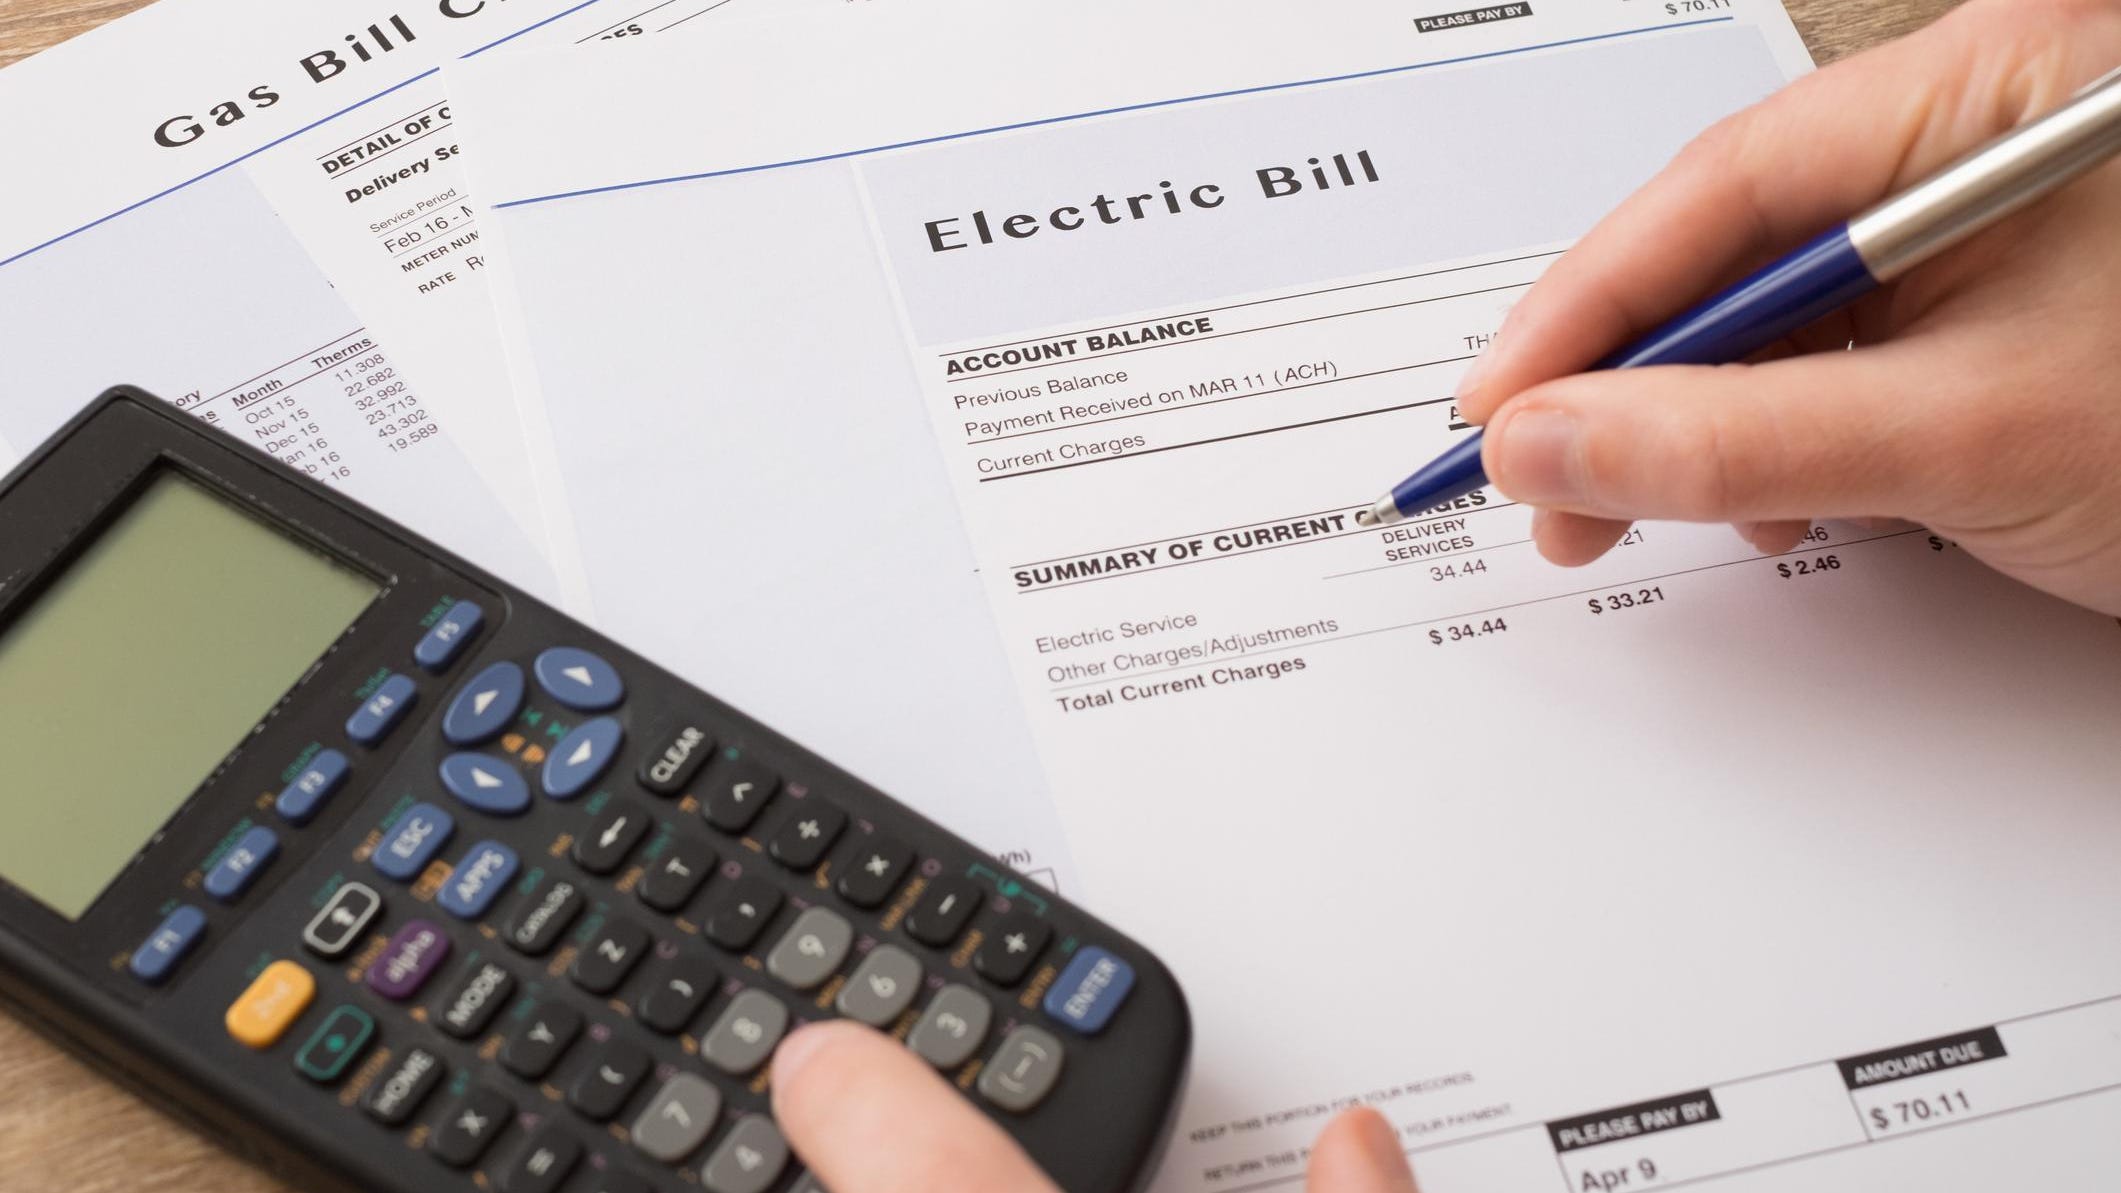 The hidden fees you'll find in your OG&E electric bill